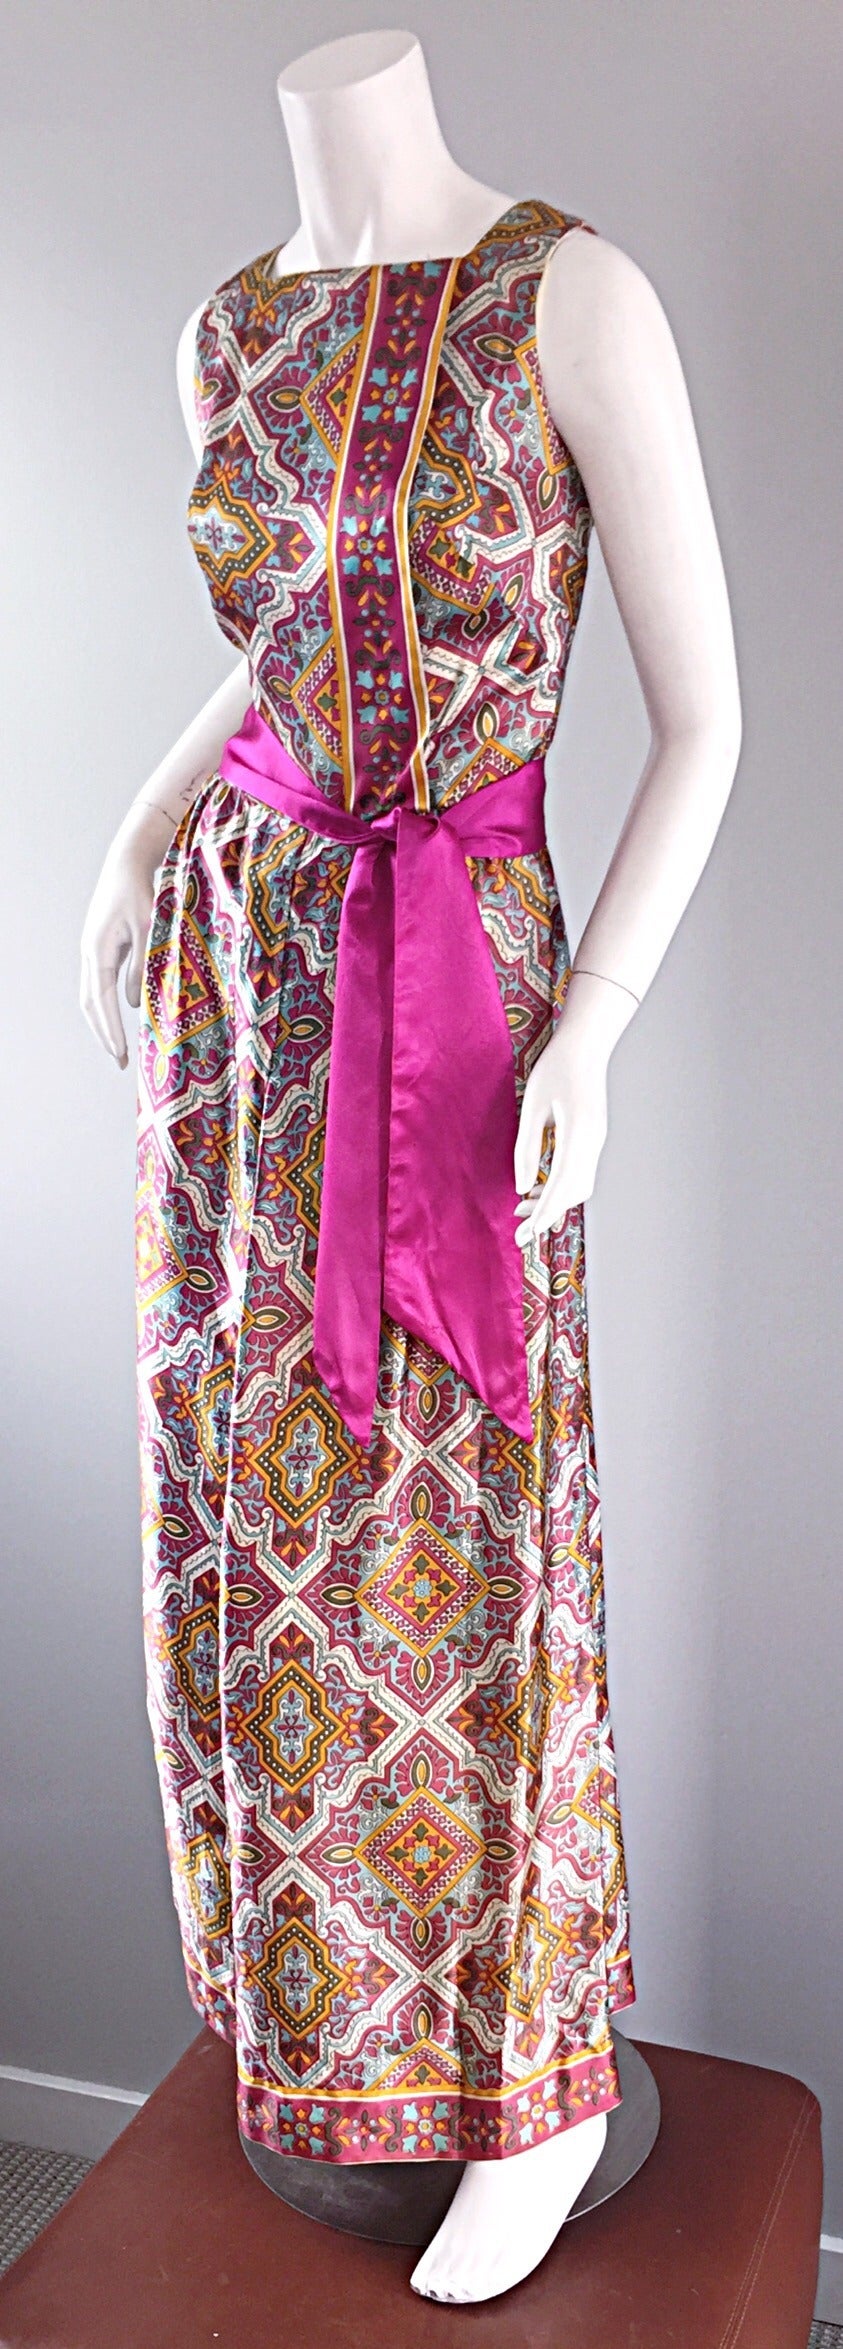 Out of this world vintage Roberta Lynn silk jumpsuit! Features wonderful ethnic prints throughout, with a fuchsia silk wrap style belt, which is detachable. Roberta Lynn was a well-known designer in the 1960s and 70s, and dressed many of Hollywood's